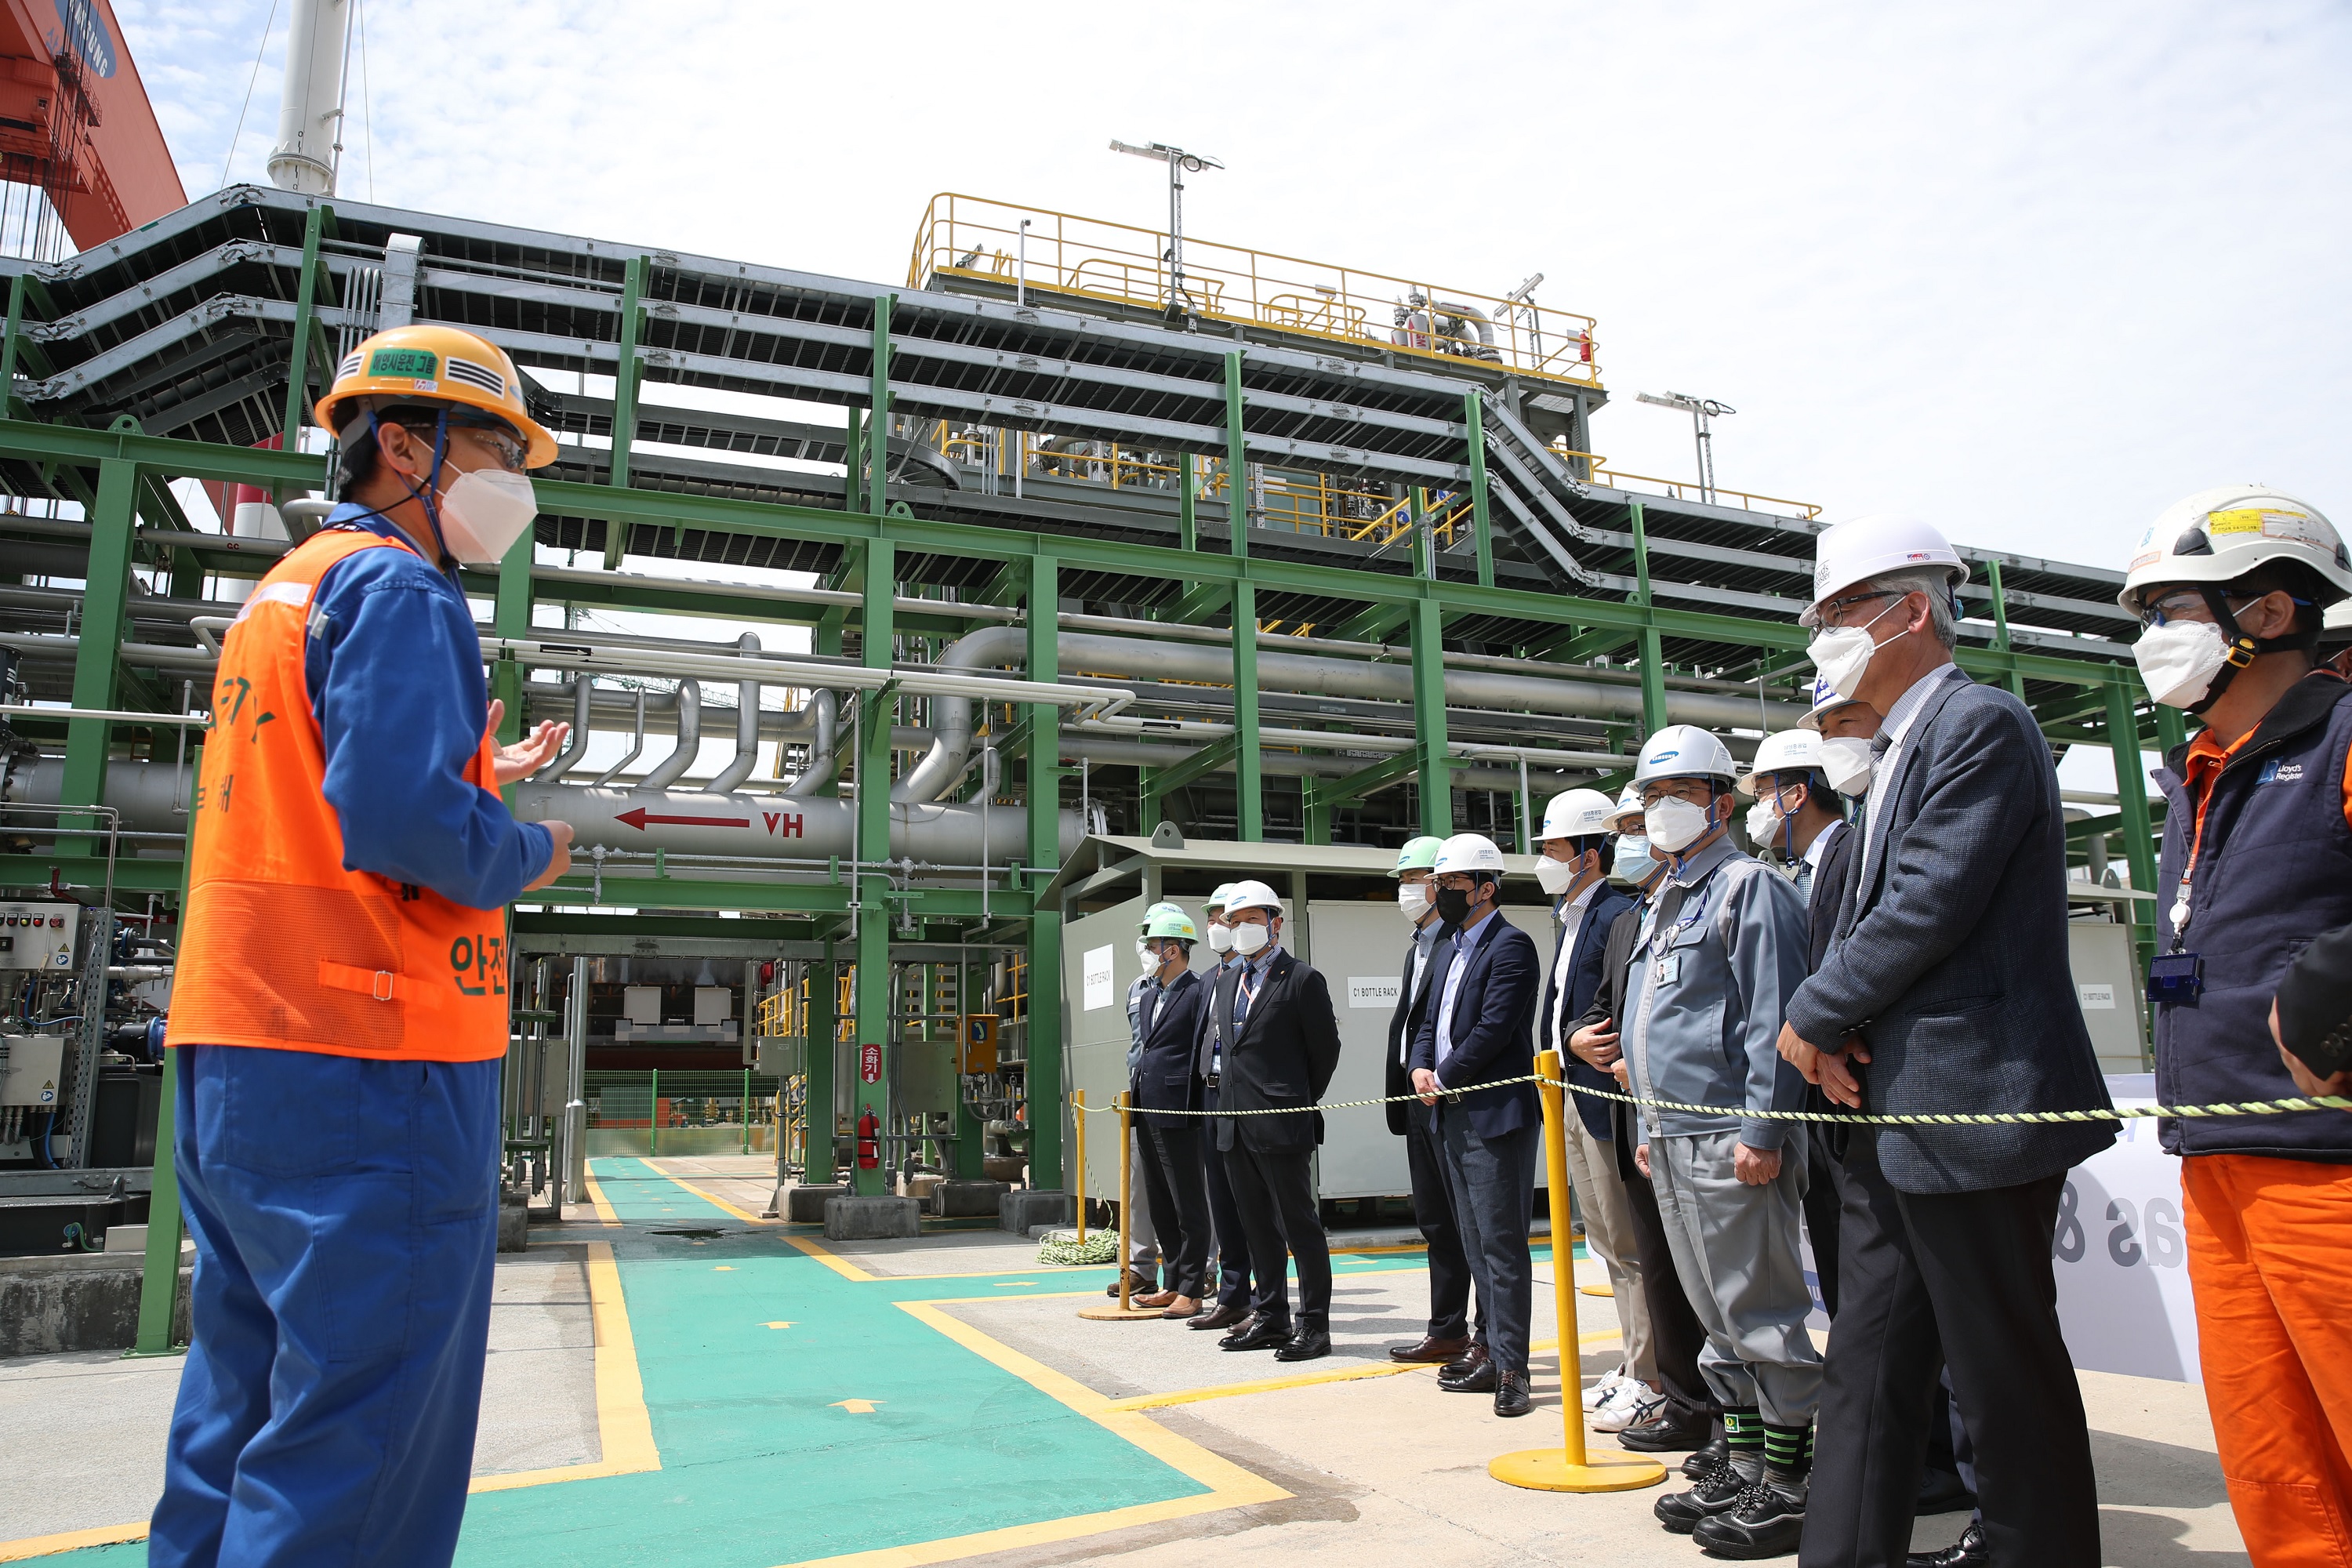 SHI completes the trial run of its LNG regasification system